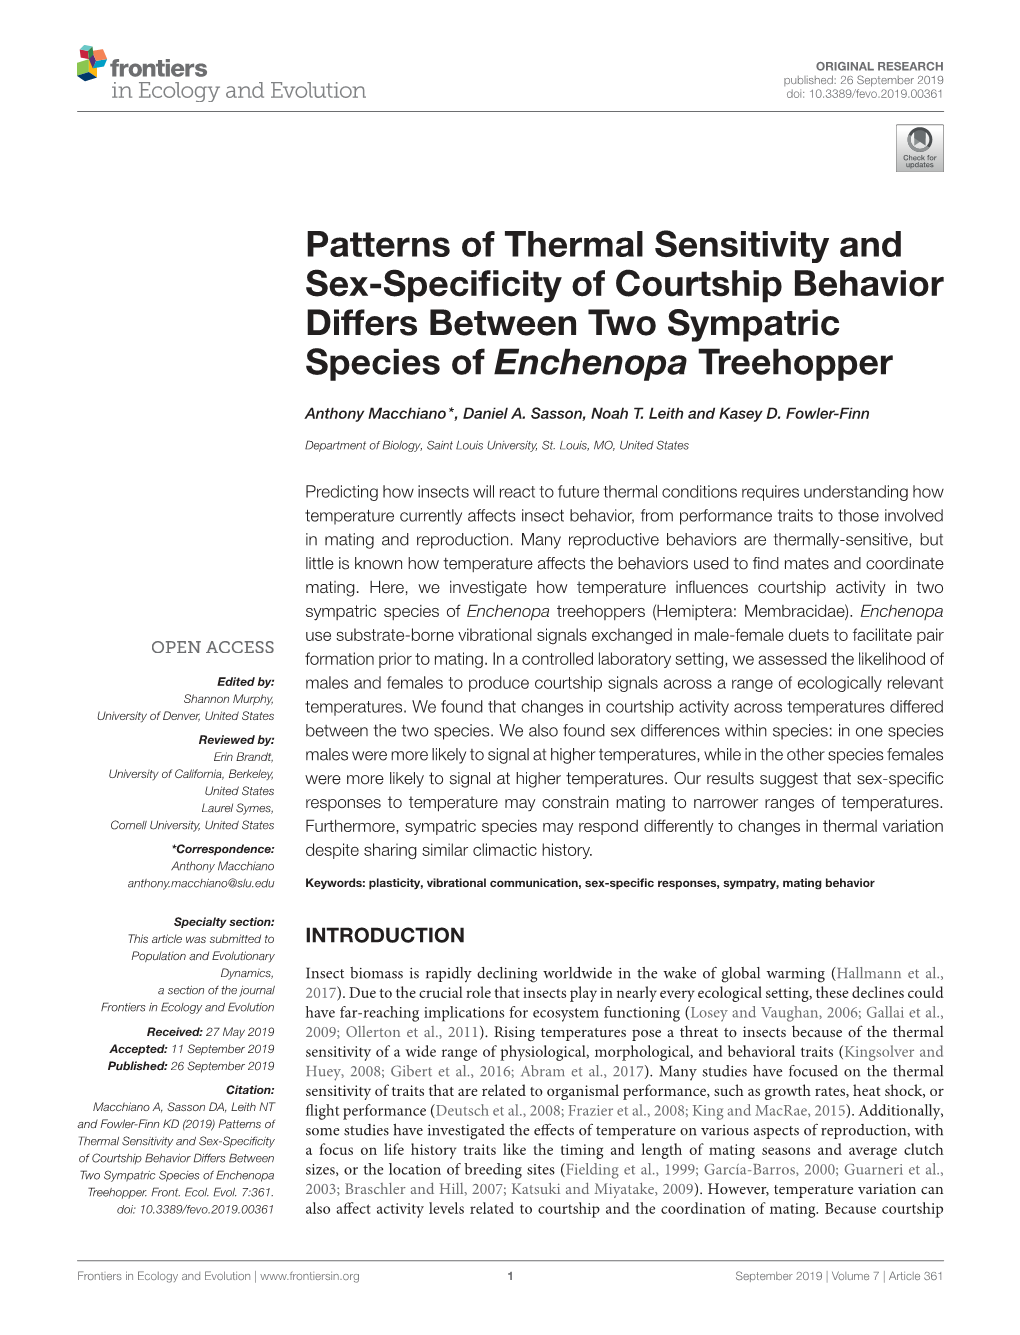 Patterns of Thermal Sensitivity and Sex-Specificity of Courtship